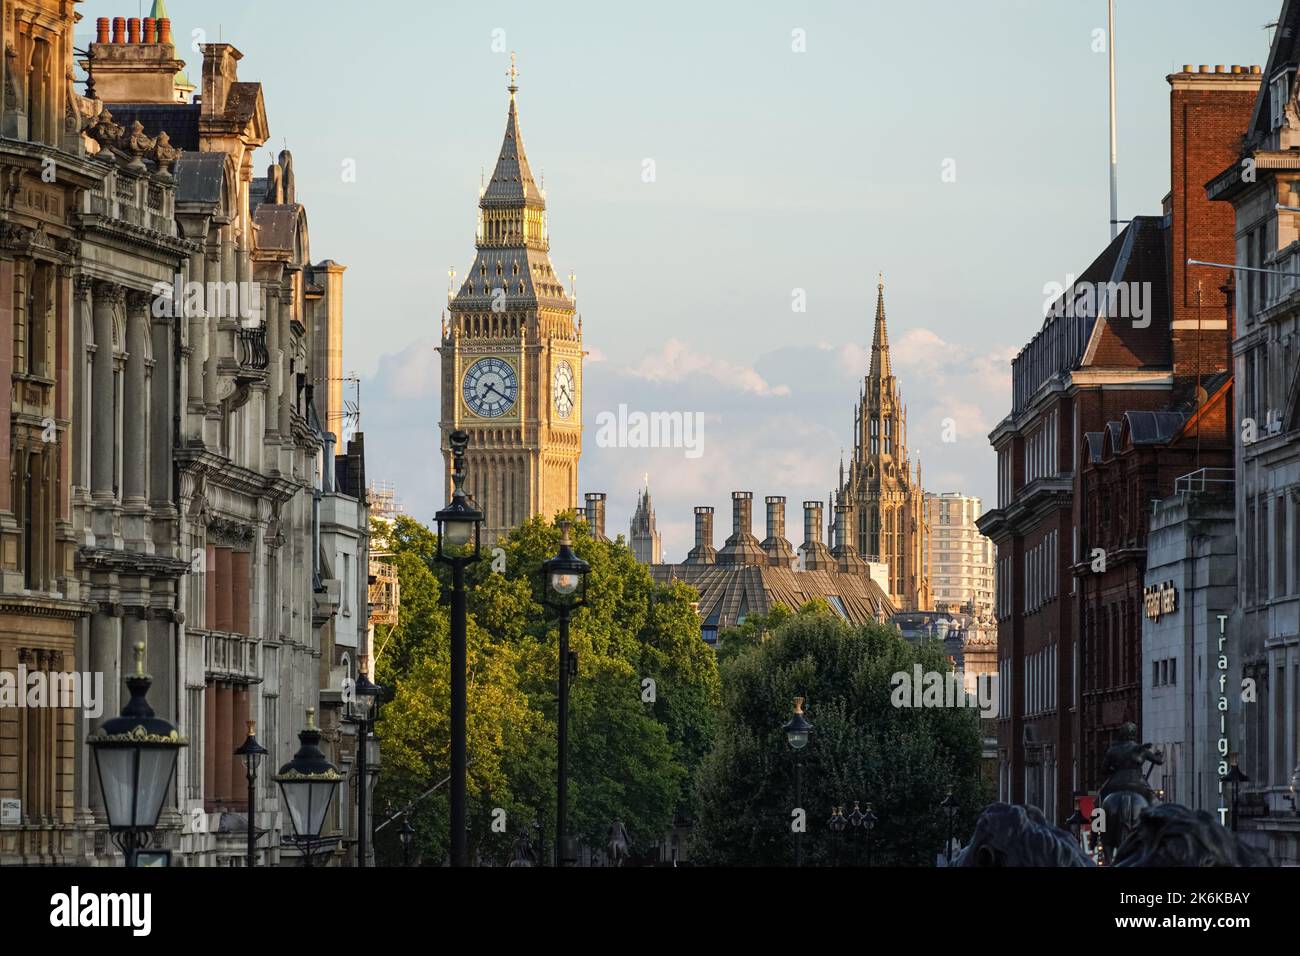 The Elizabeth Tower, Big Ben clock tower and historic buildings in Westminster, London England United Kingdom UK Stock Photo